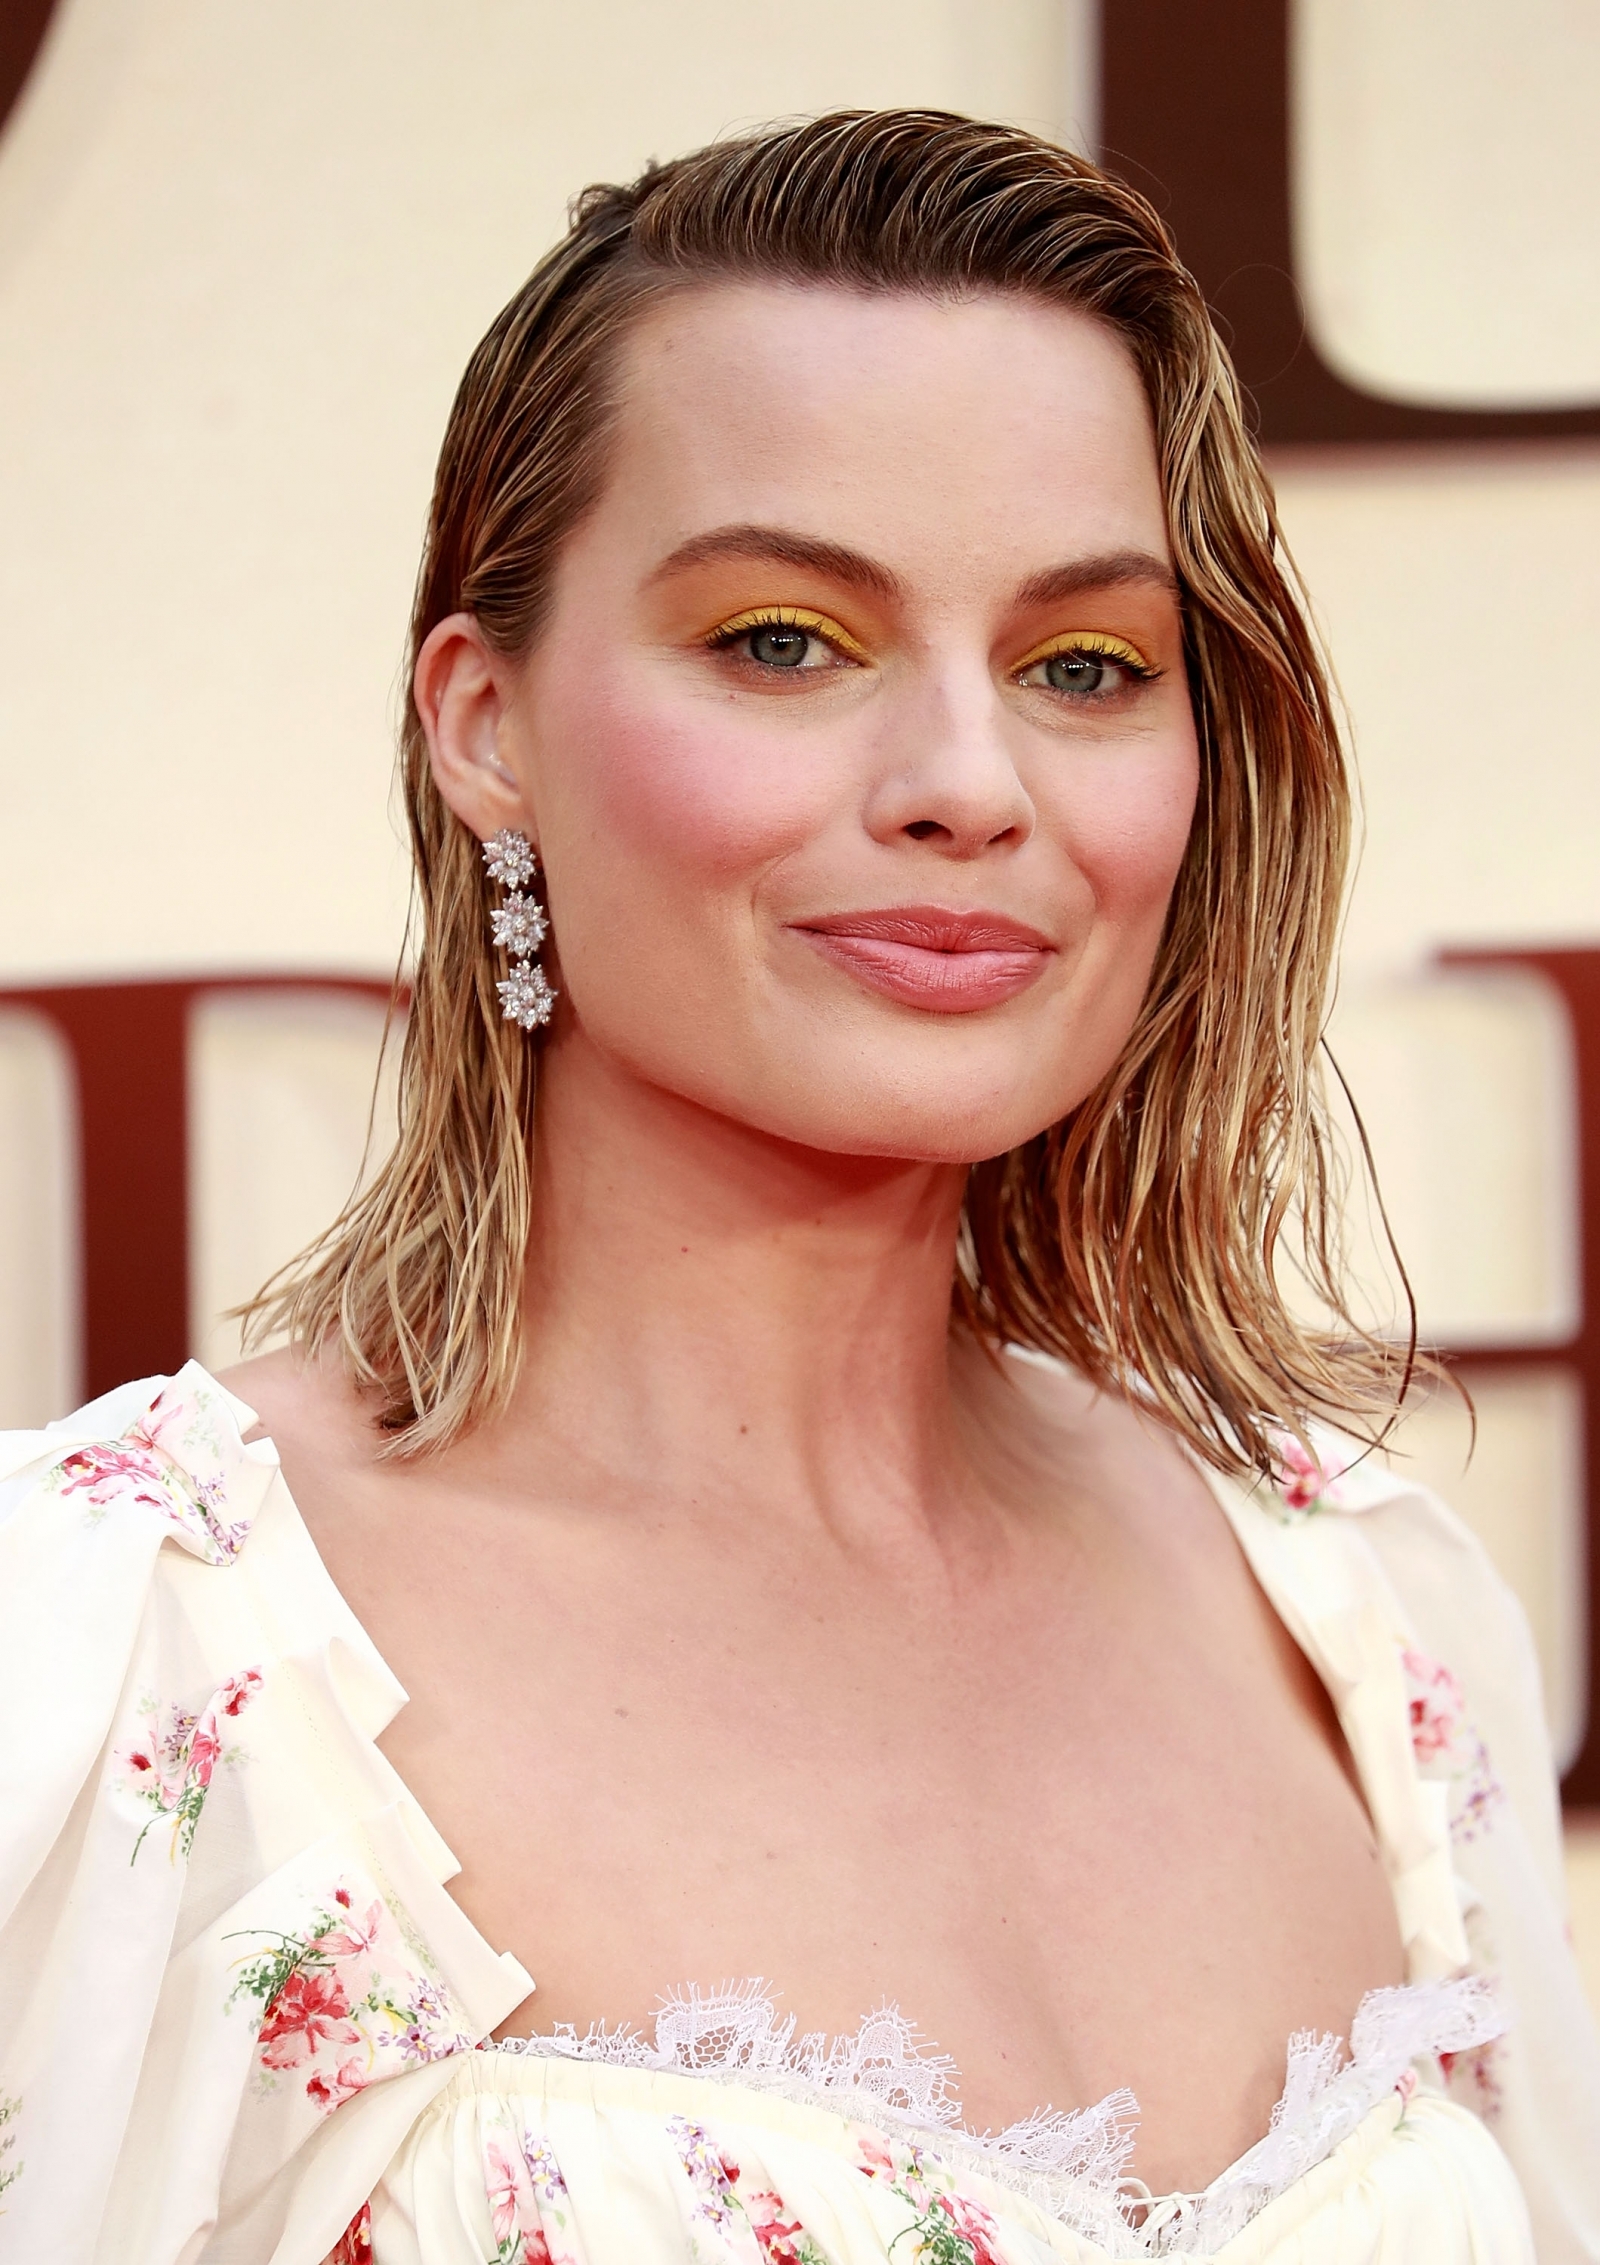 Margot Robbie delights her fans on the red carpet at I, Tonya screening1600 x 2265